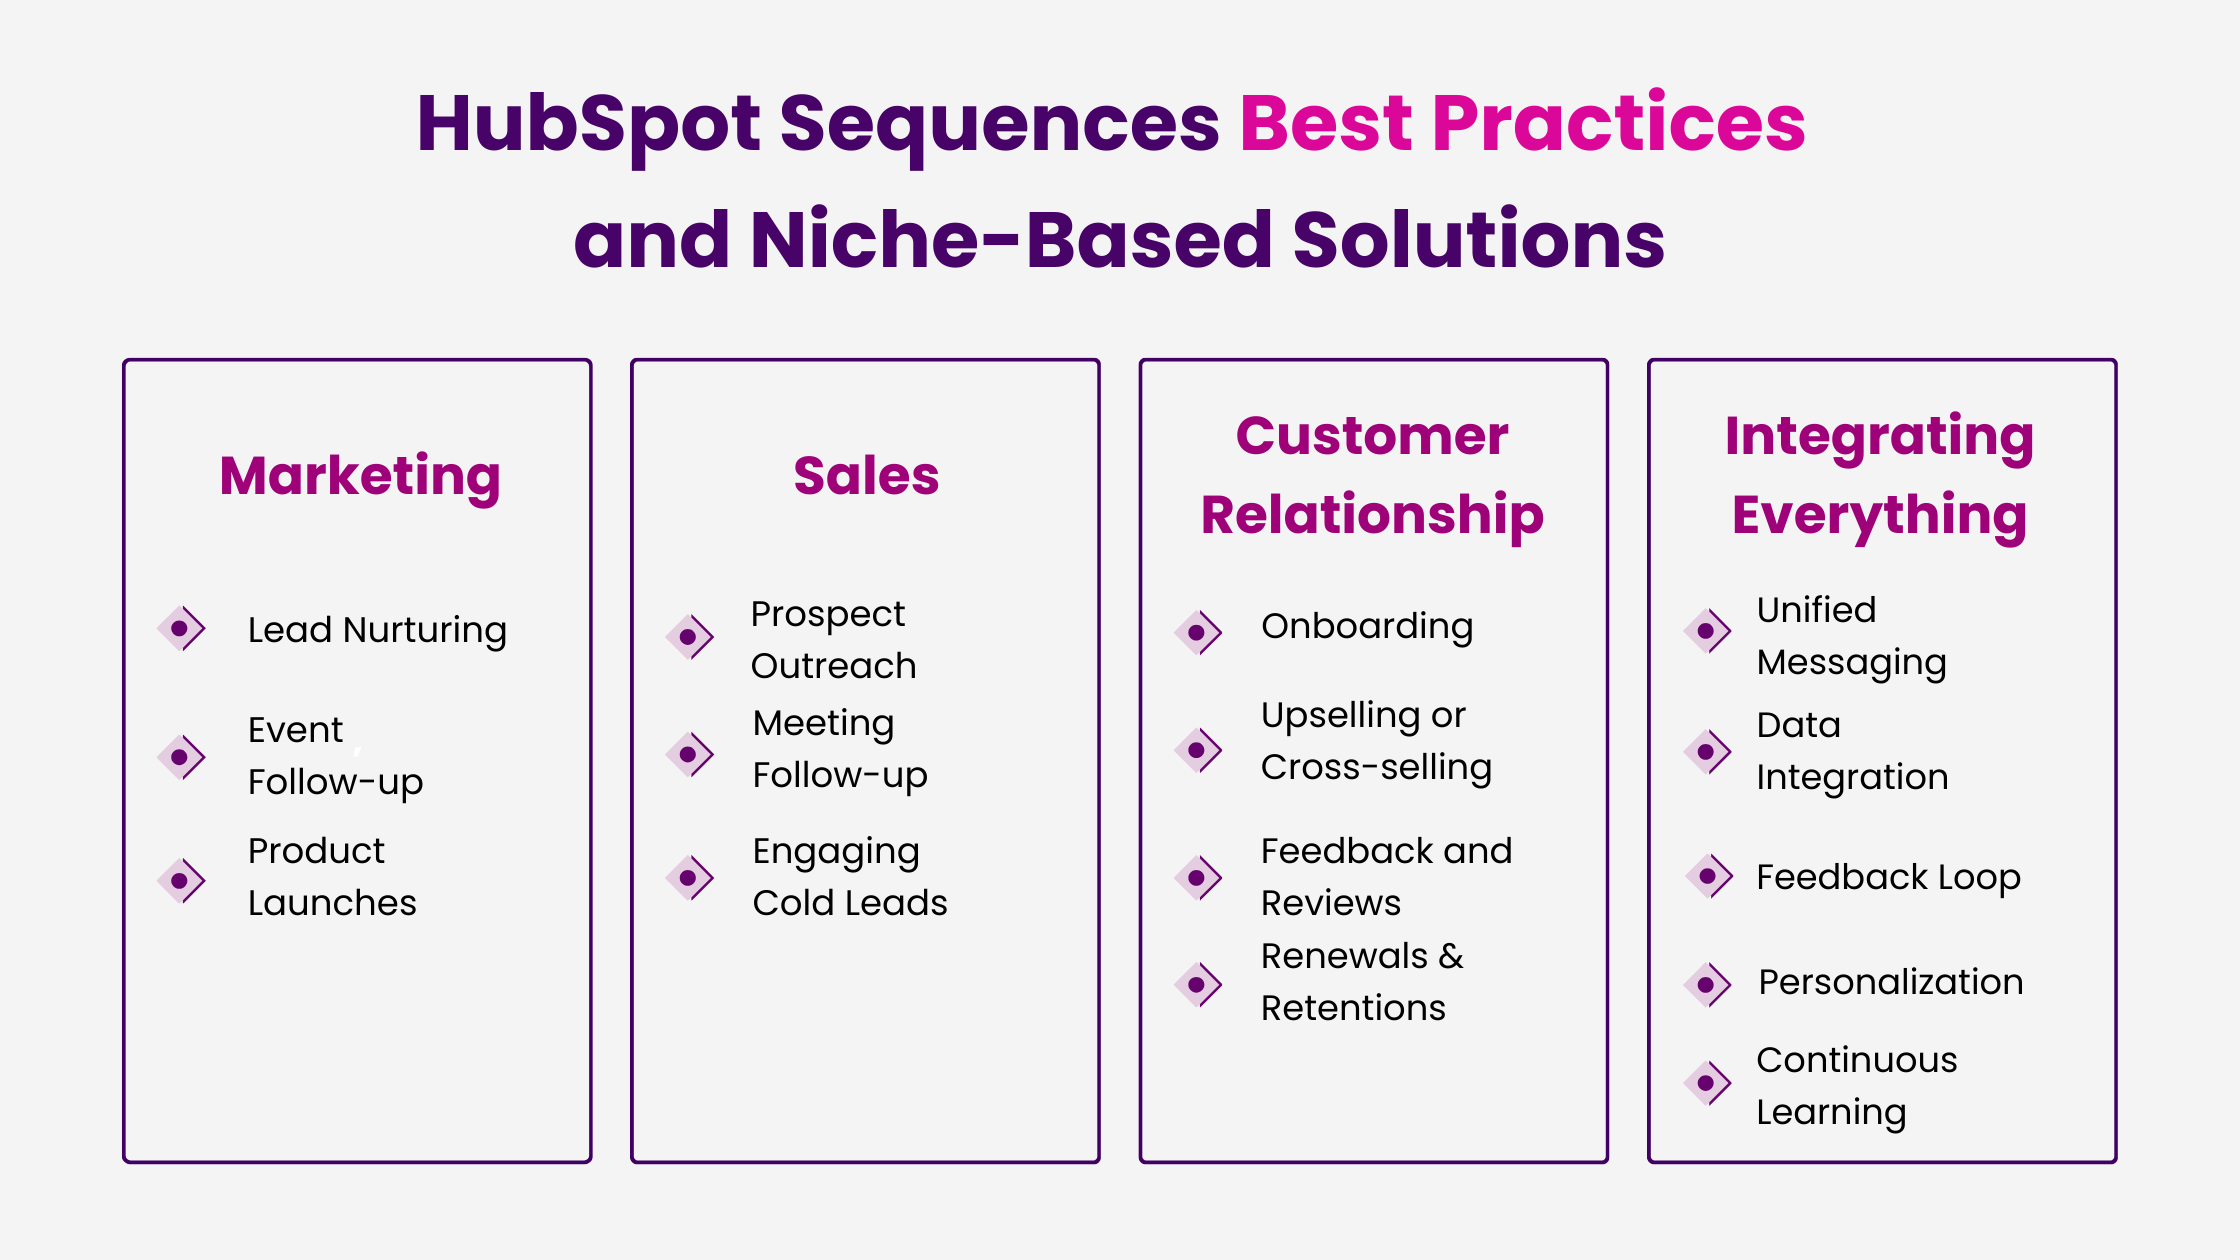 HubSpot Sequences Best Practices and Niche-based Solutions